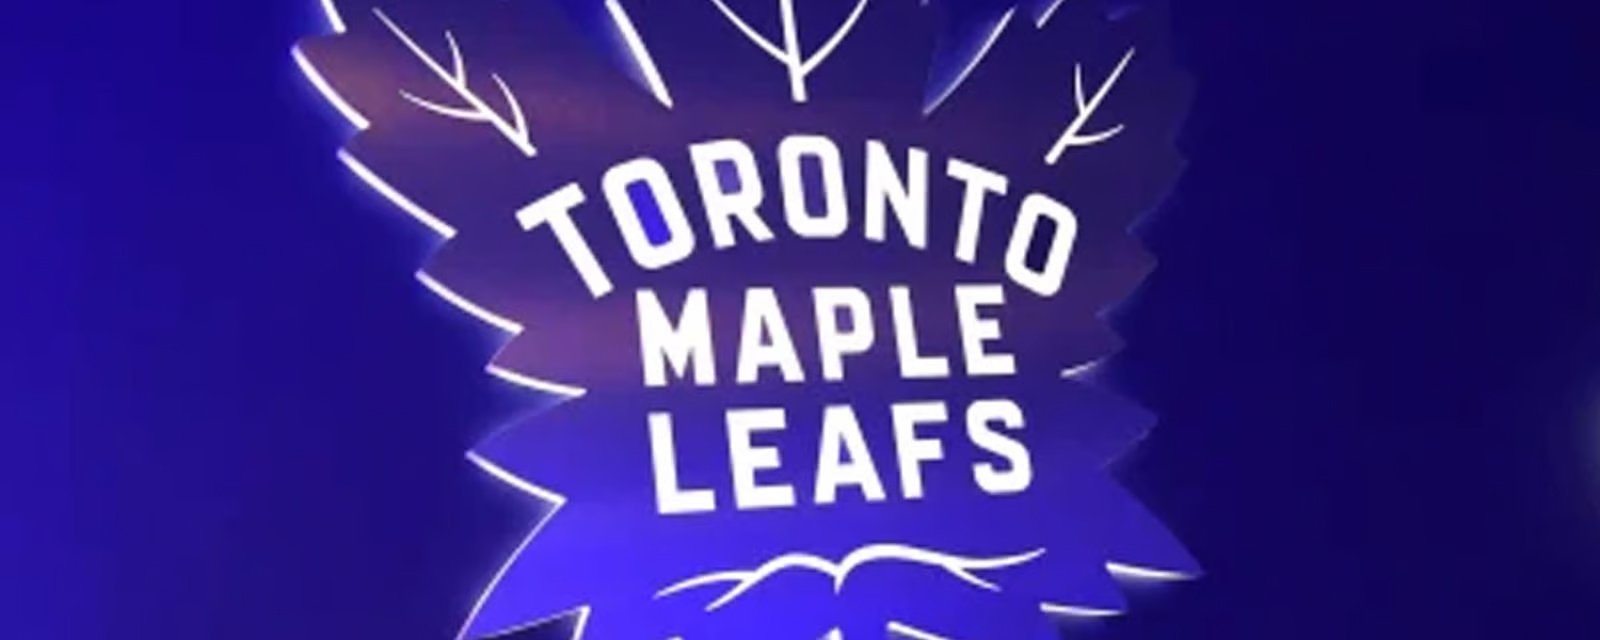 Maple Leafs go after two biggest free agent targets this offseason